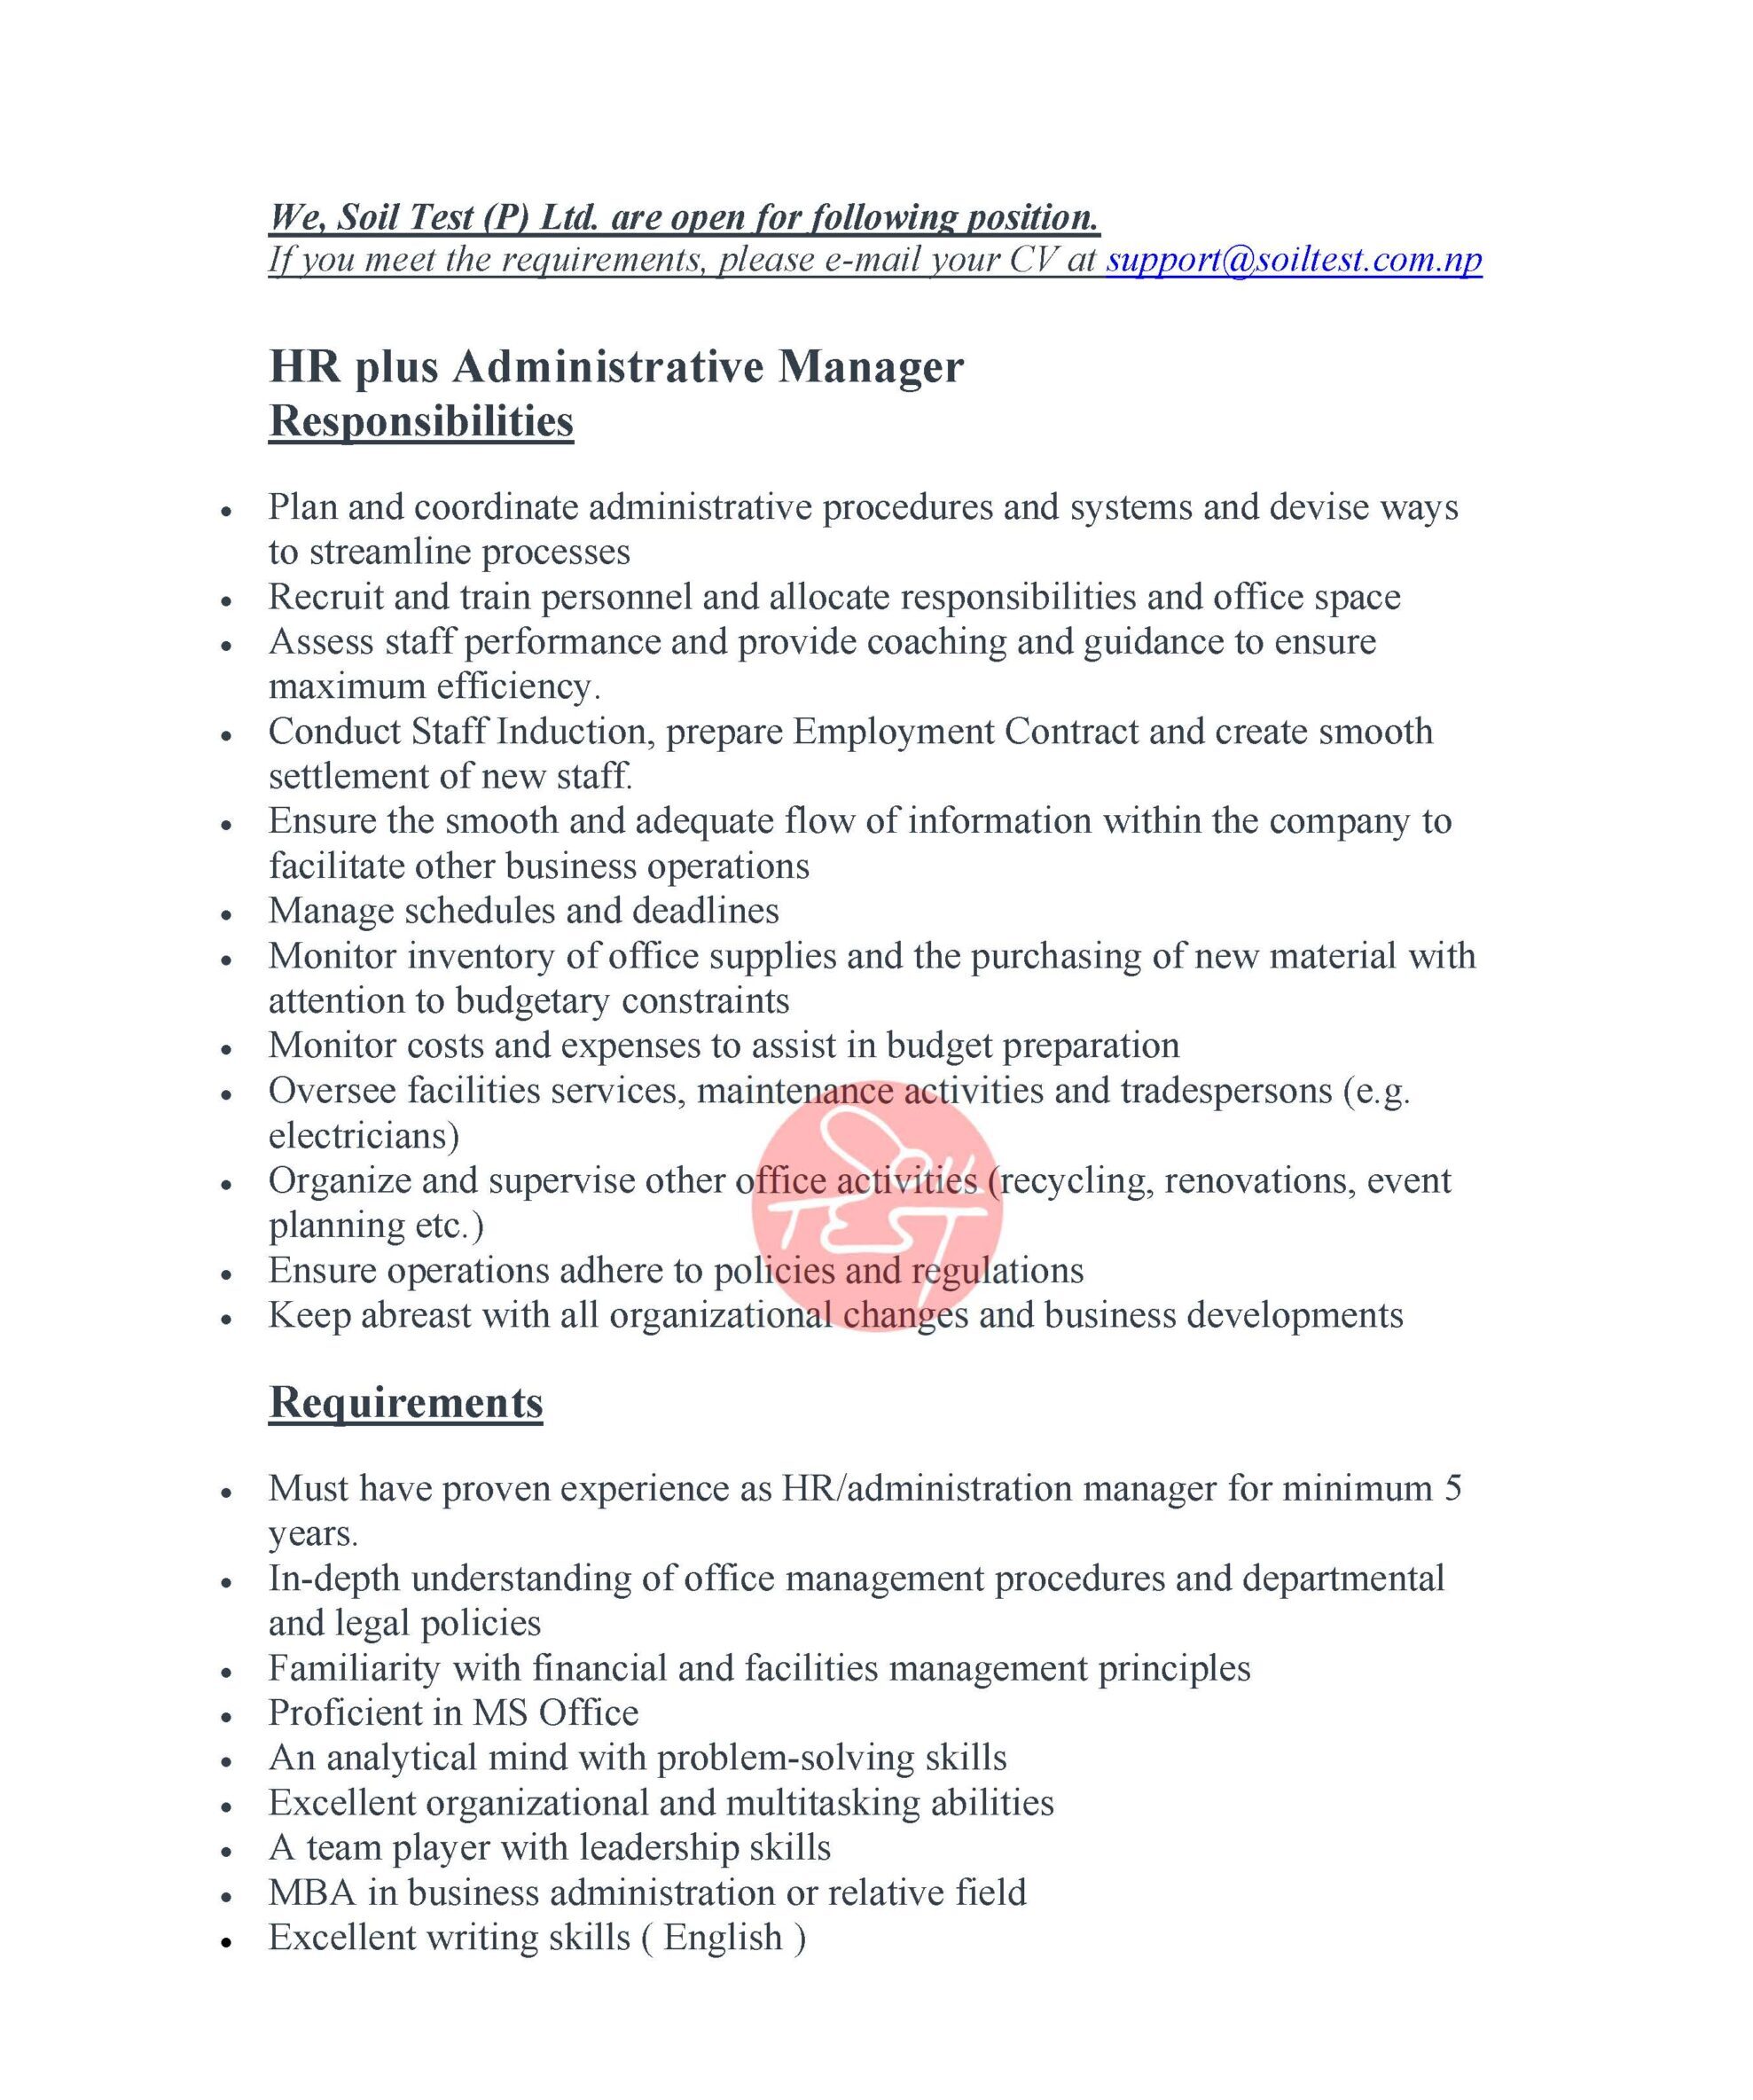 vacancy for HR and Administrative Manager at Soil Test